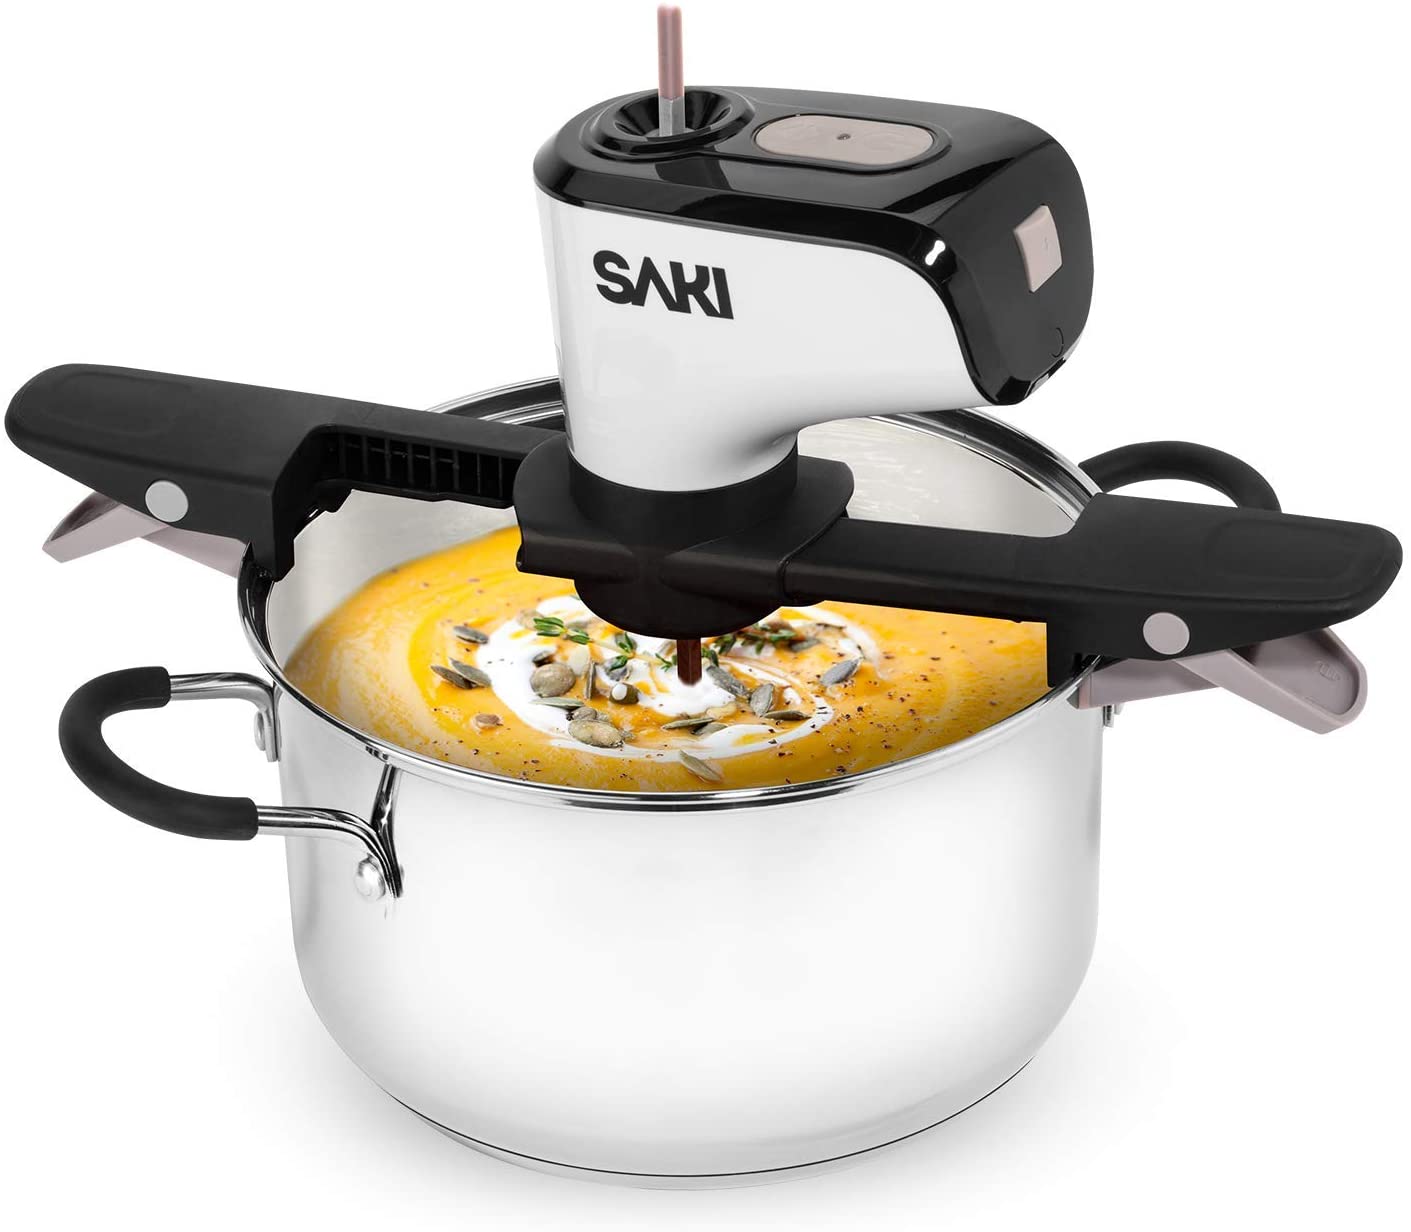 SAKI Automatic Pot Stirrer for Cooking, with 2 speeds, Adjustable, Hands Free, BPA free, Cordless and Rechargeable (2021 Updated Battery)